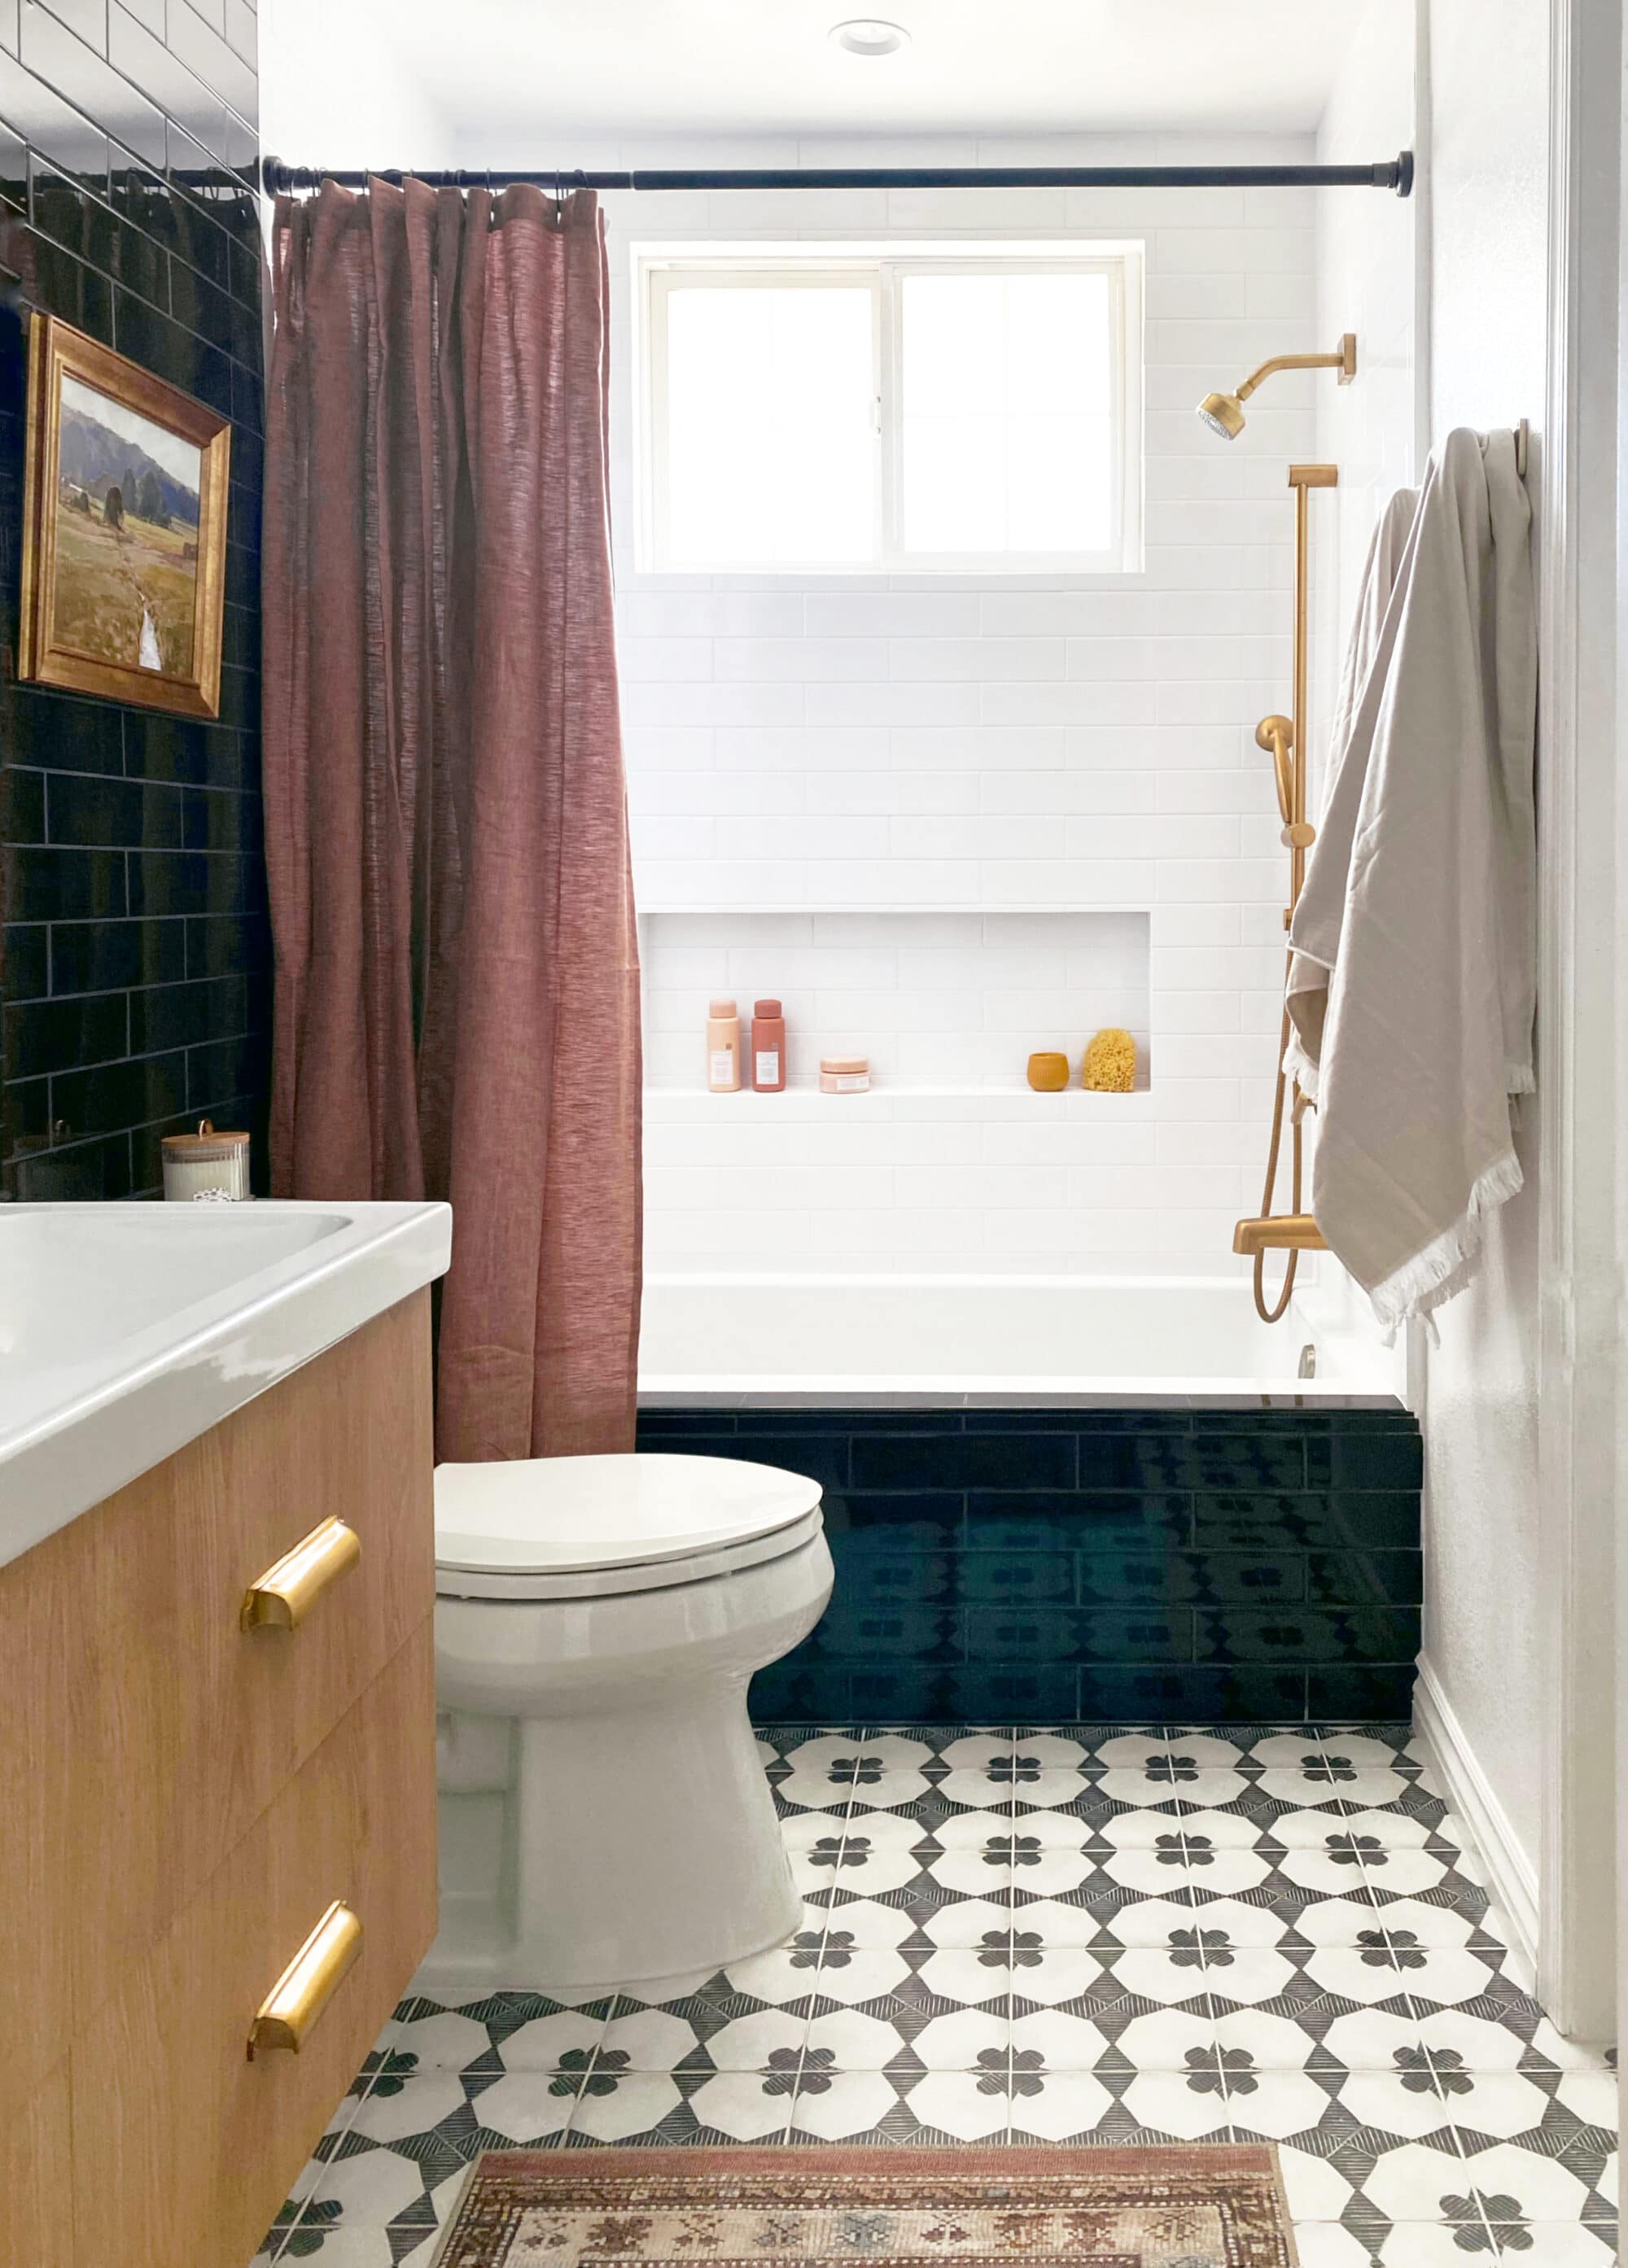 Three Kinds of Tile are Featured in This Budget Bathroom Renovation